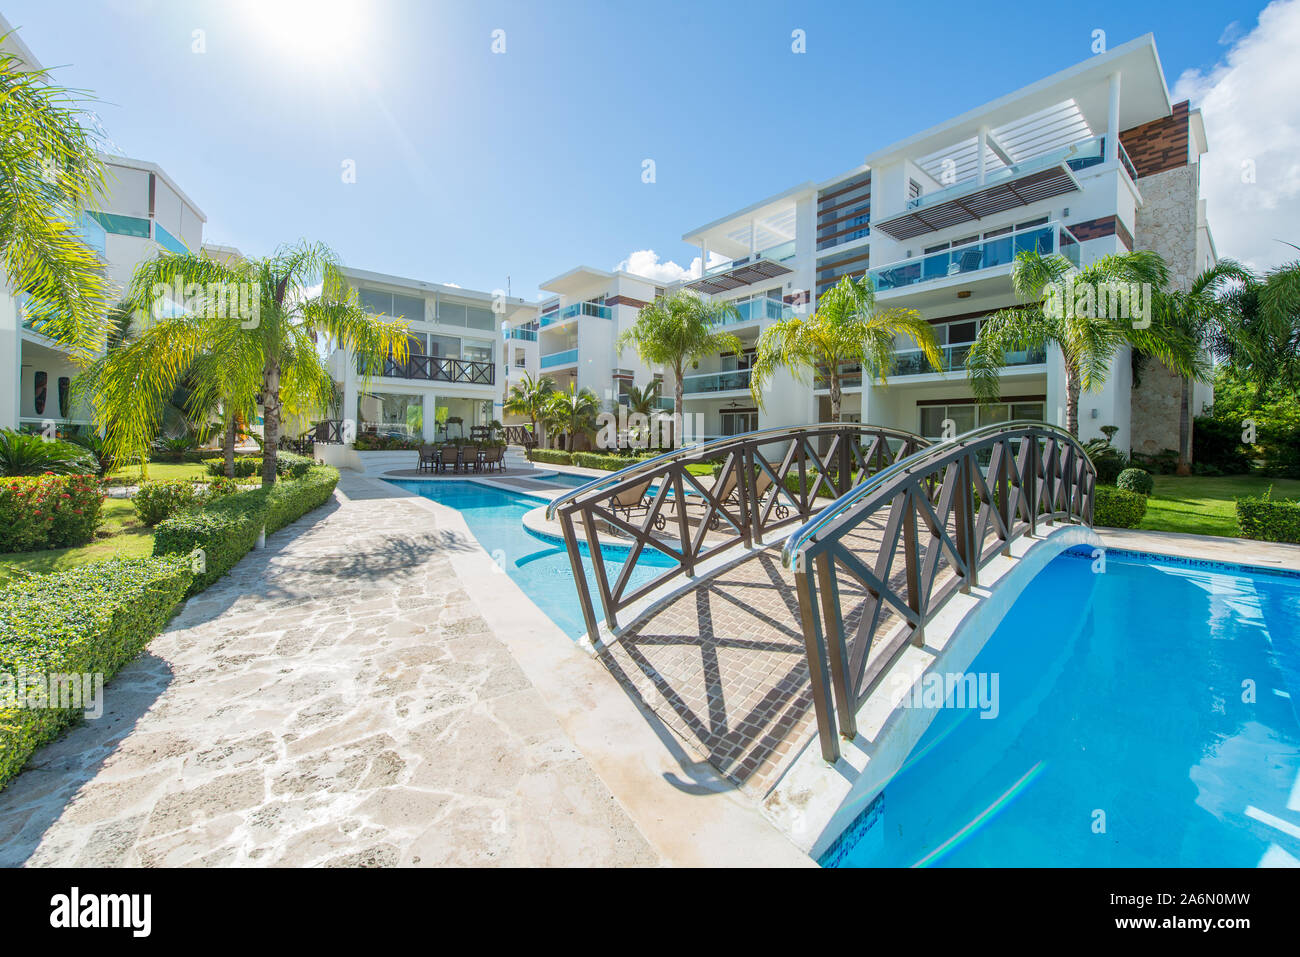 Punta Cana, La Altagracia / Dominican Republic - April 10 2014: Condominum Resort Looking with Palm Trees and Pools fo Rich Strangers Stock Photo